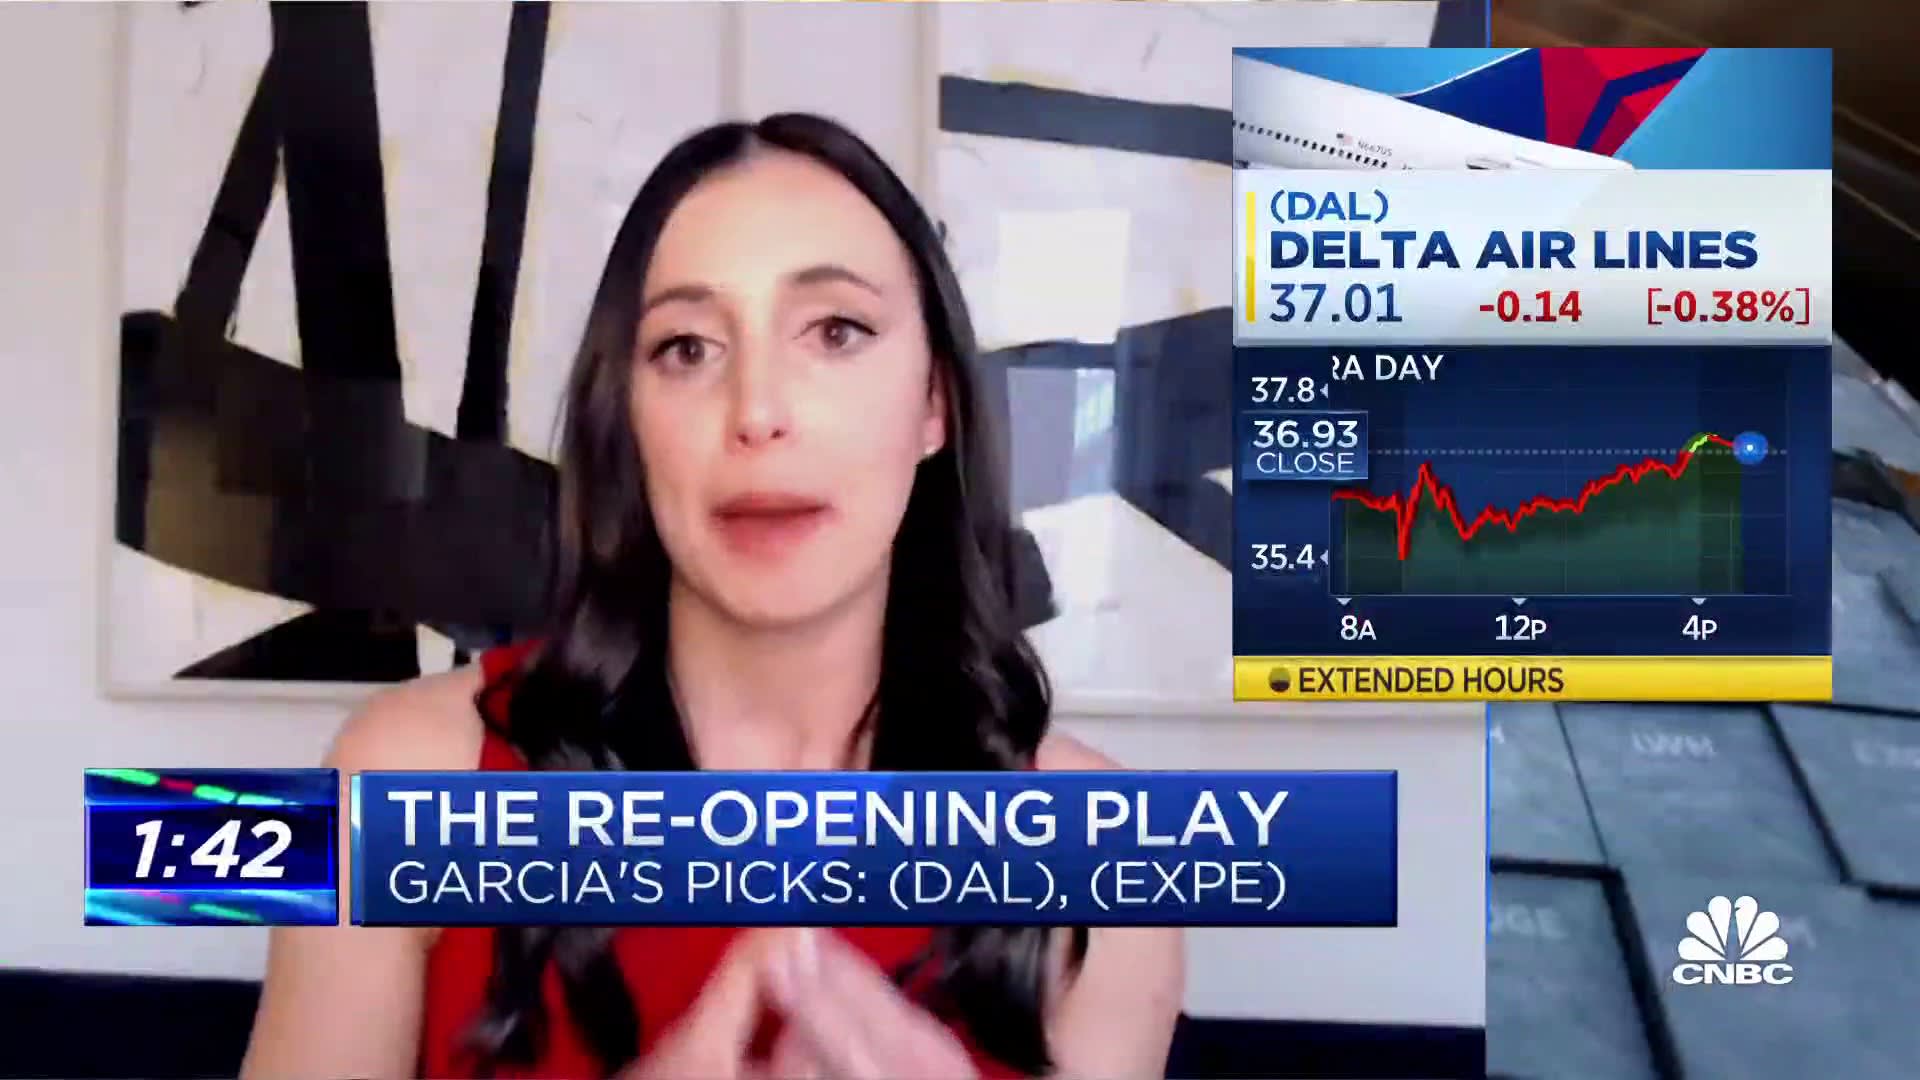 Courtney Garcia’s top picks: Delta Airlines, Expedia